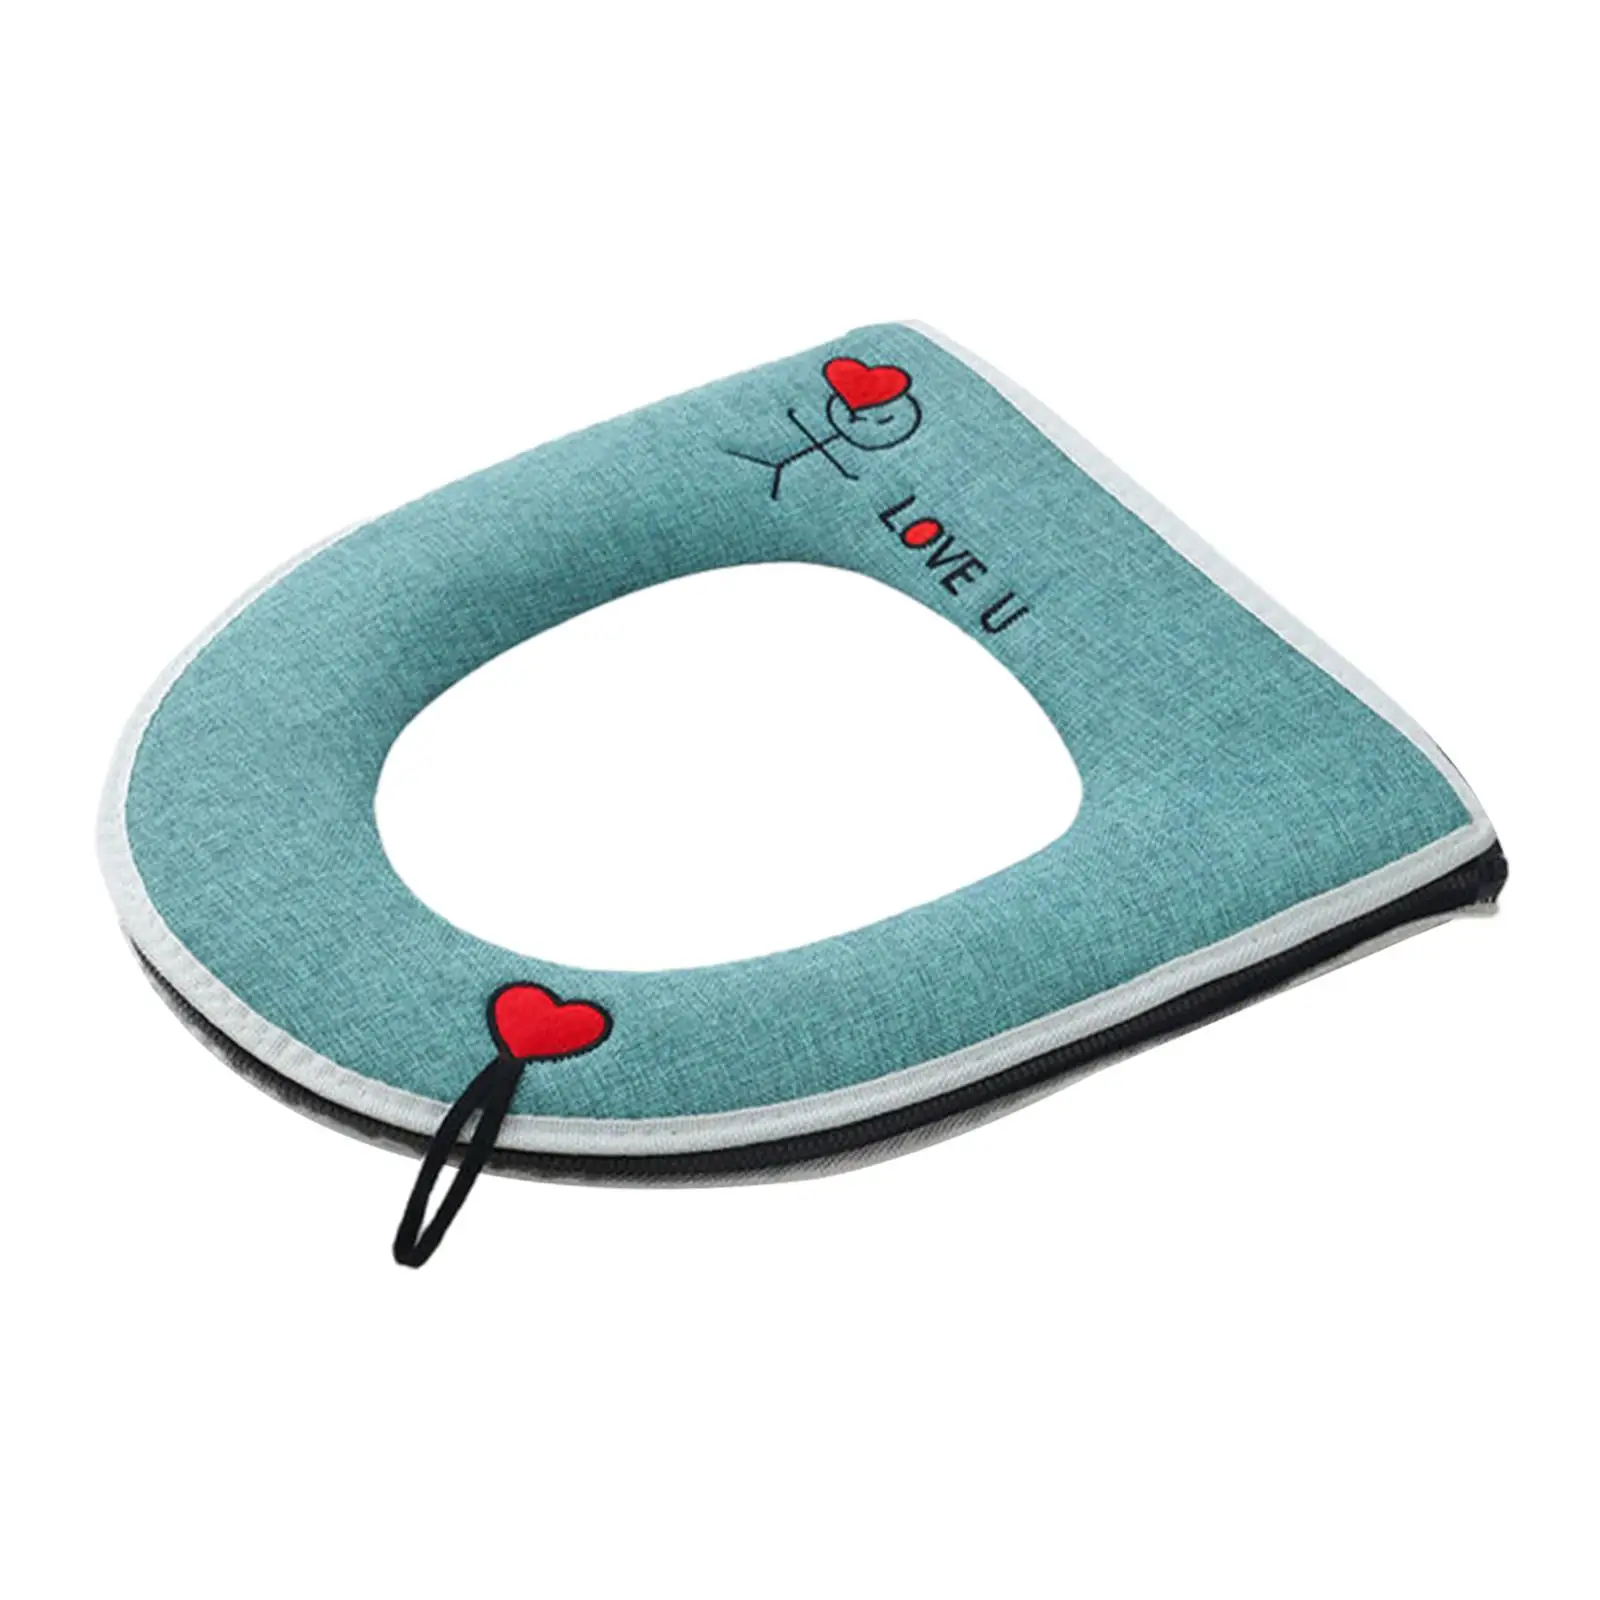 Thicken Toilet Seat Cushion Soft Warm Toilet Seat Covers for Home Traveling